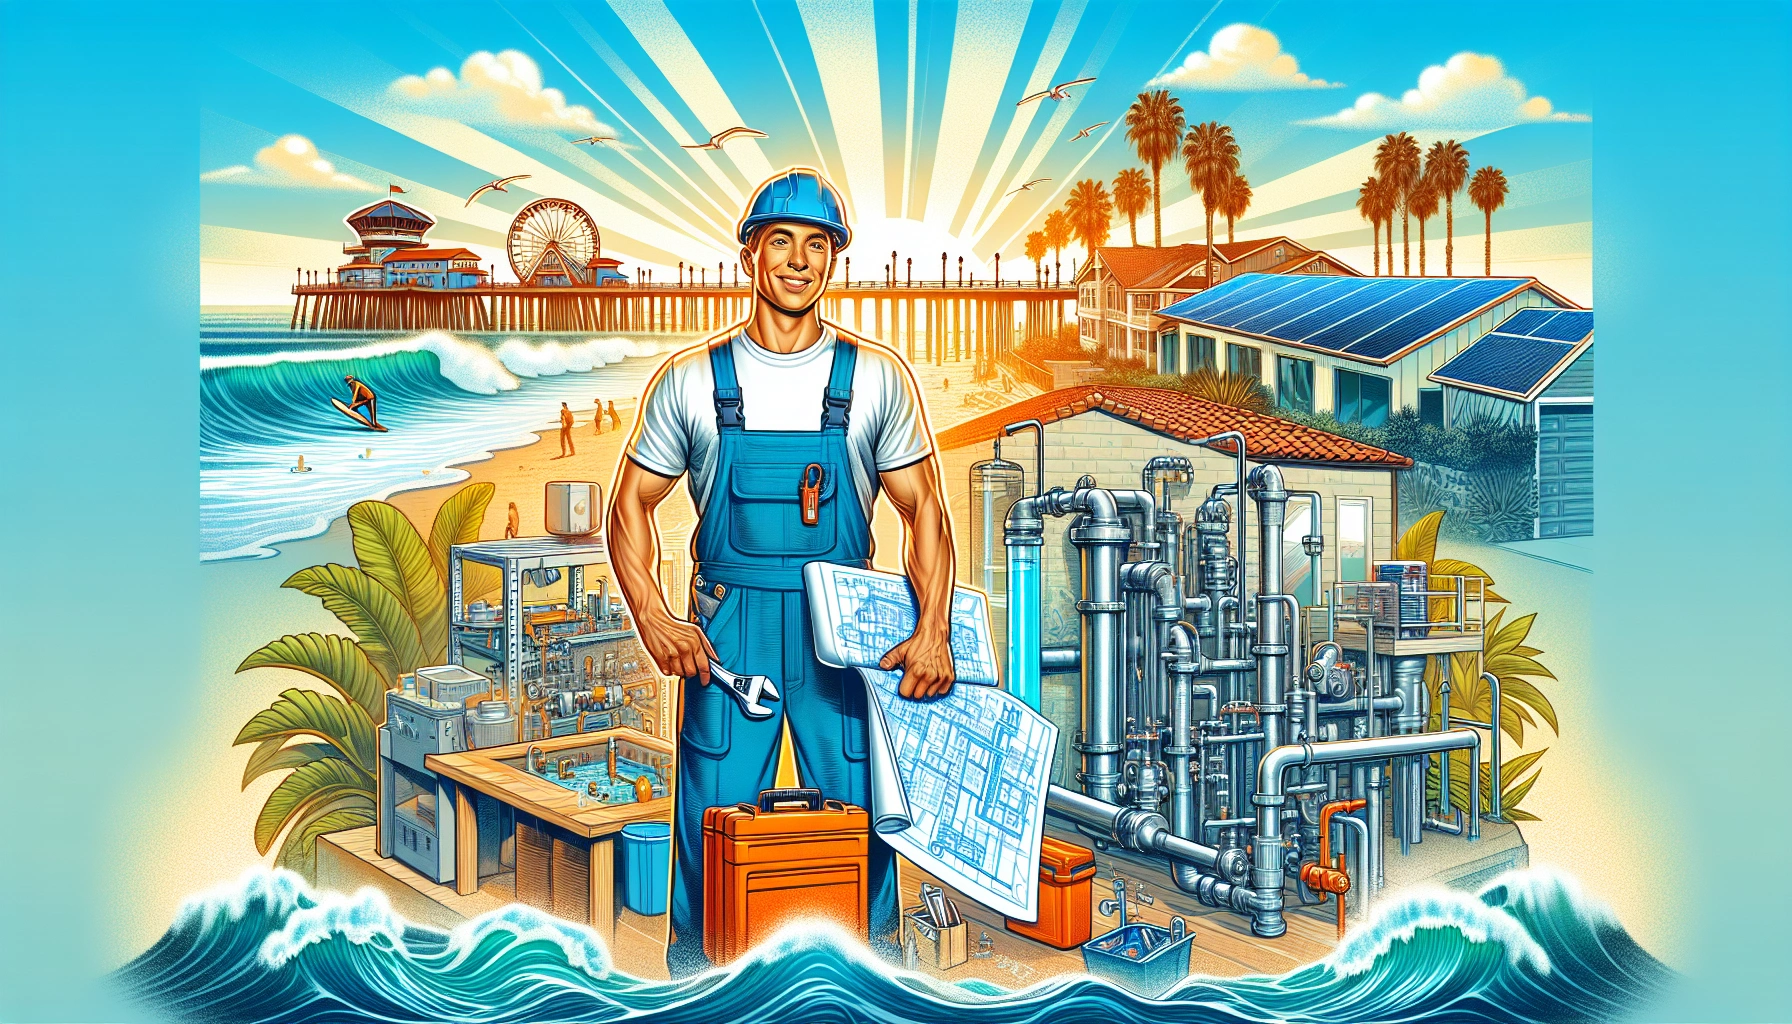 Find the Best Huntington Beach Plumber for Your Water Treatment Projects